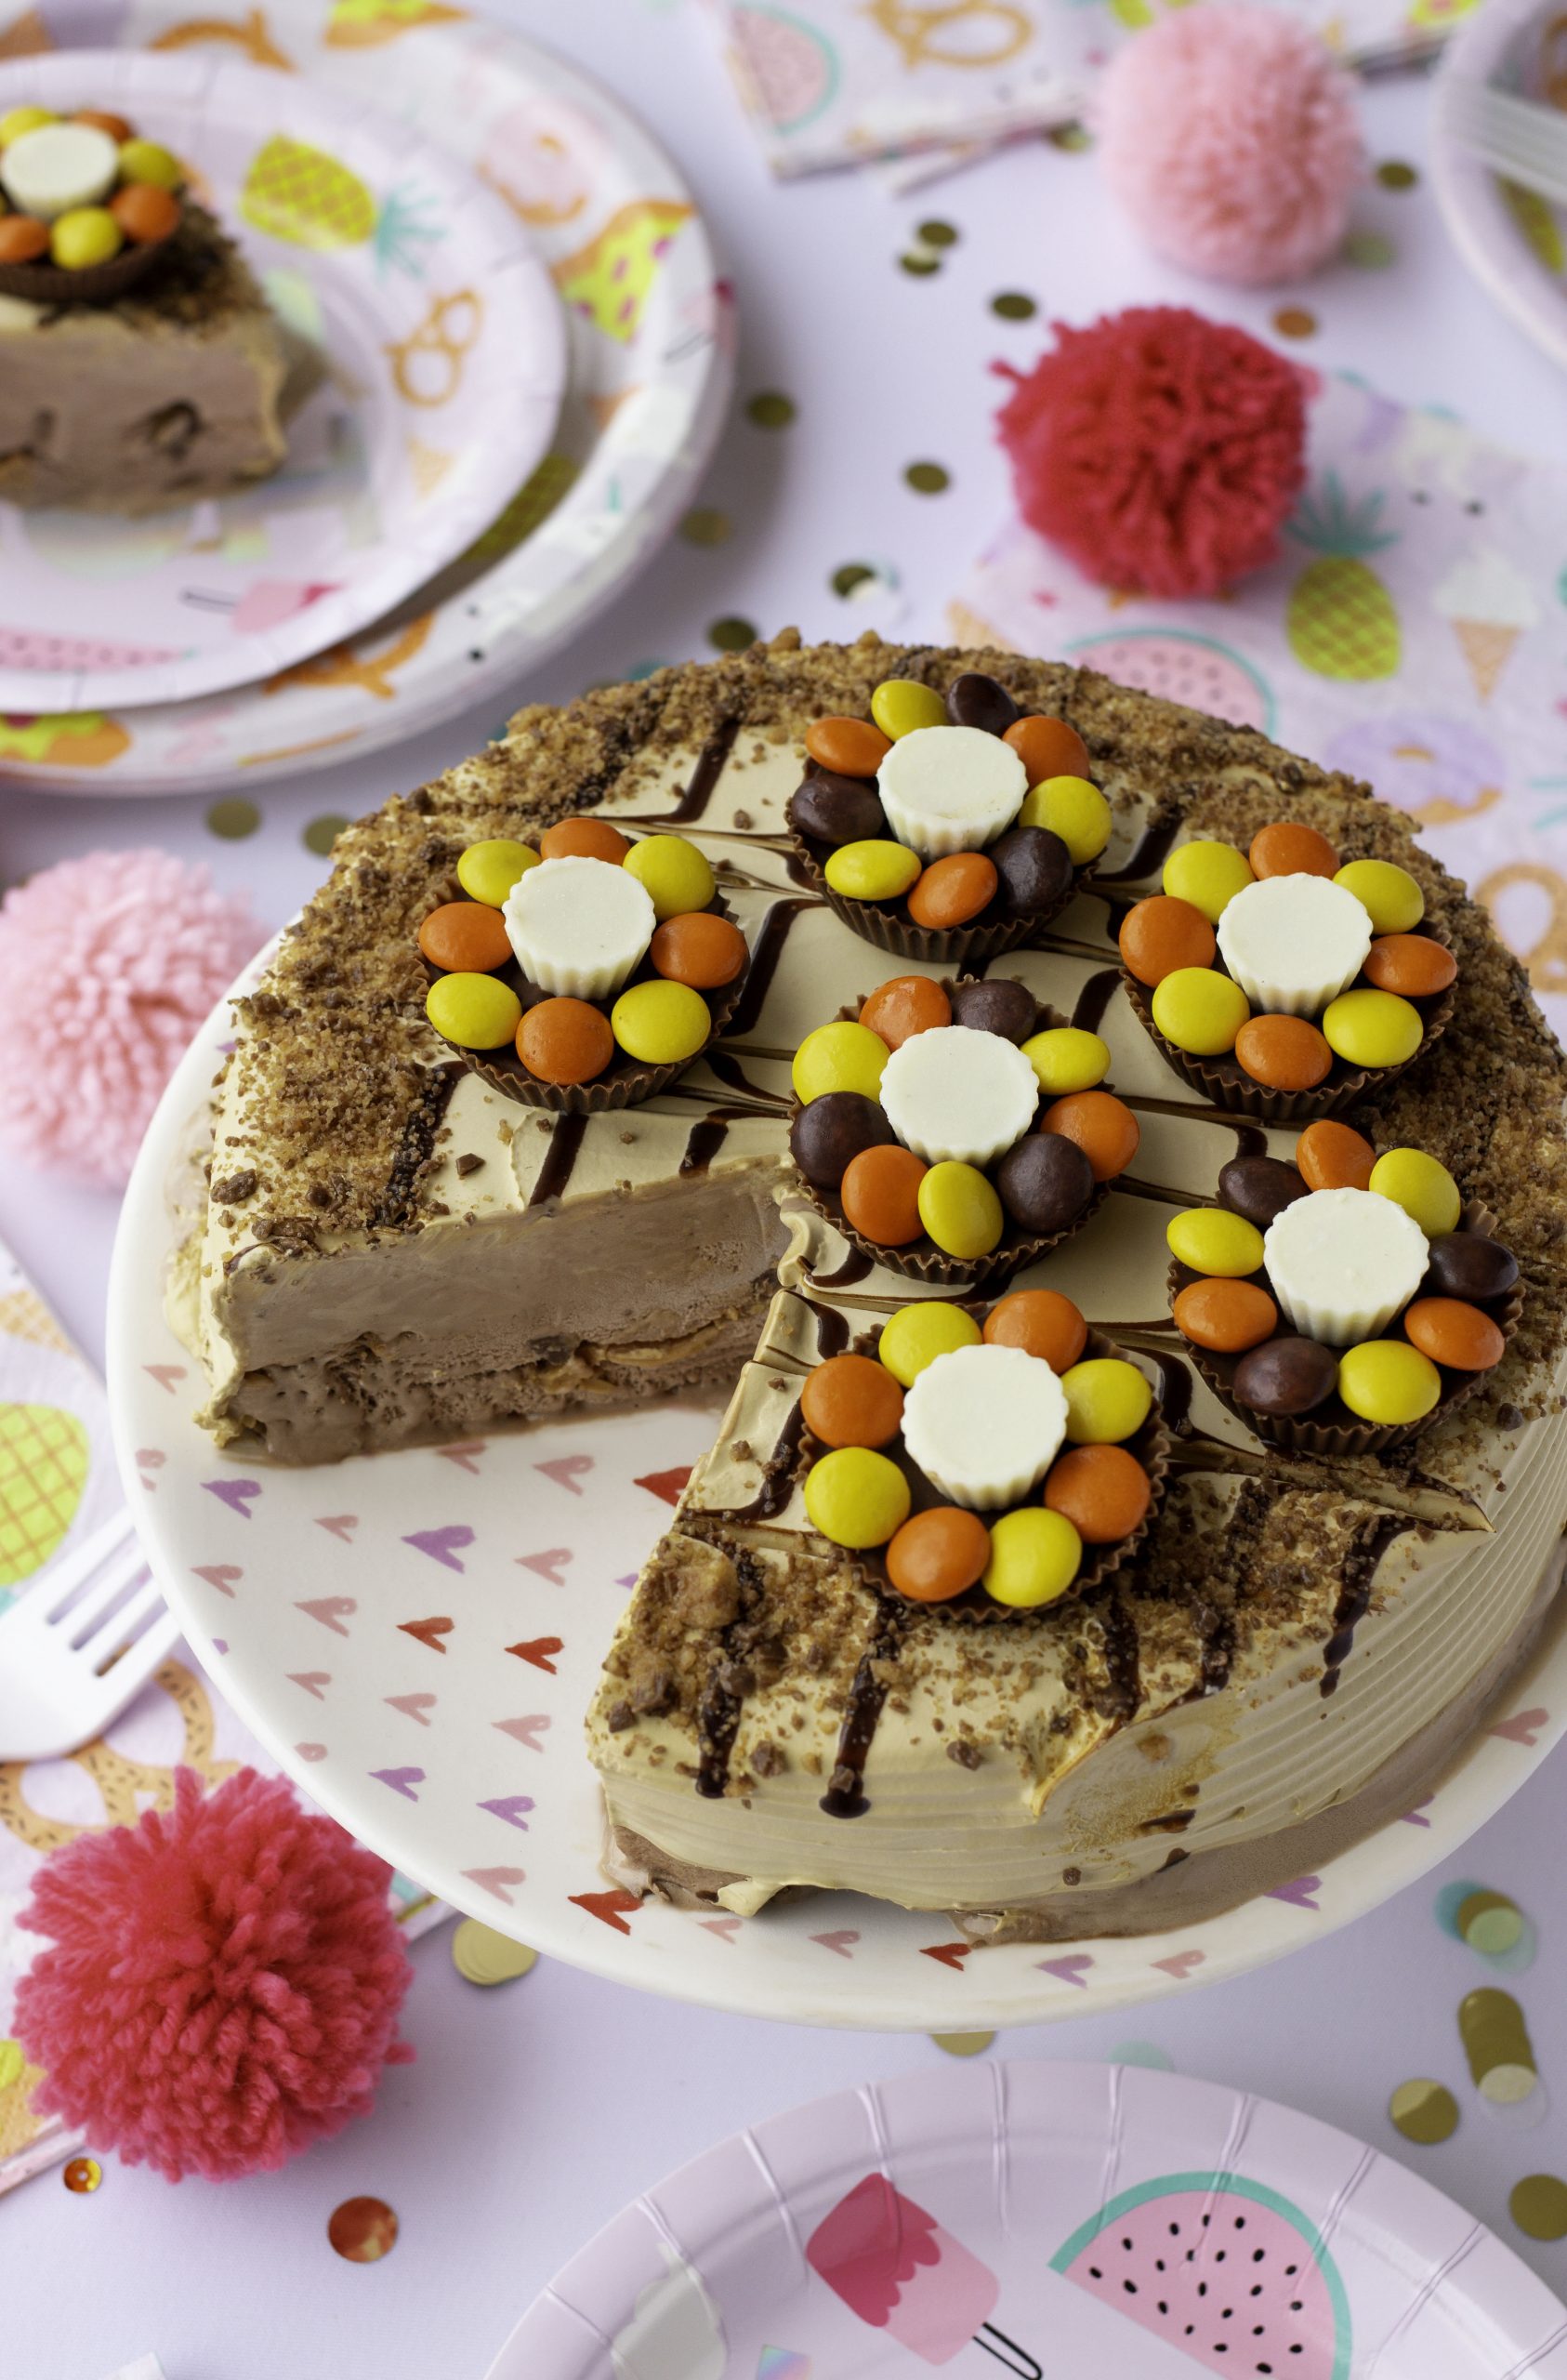 Reeses Peanut Butter Ice Cream Cake with Flowers